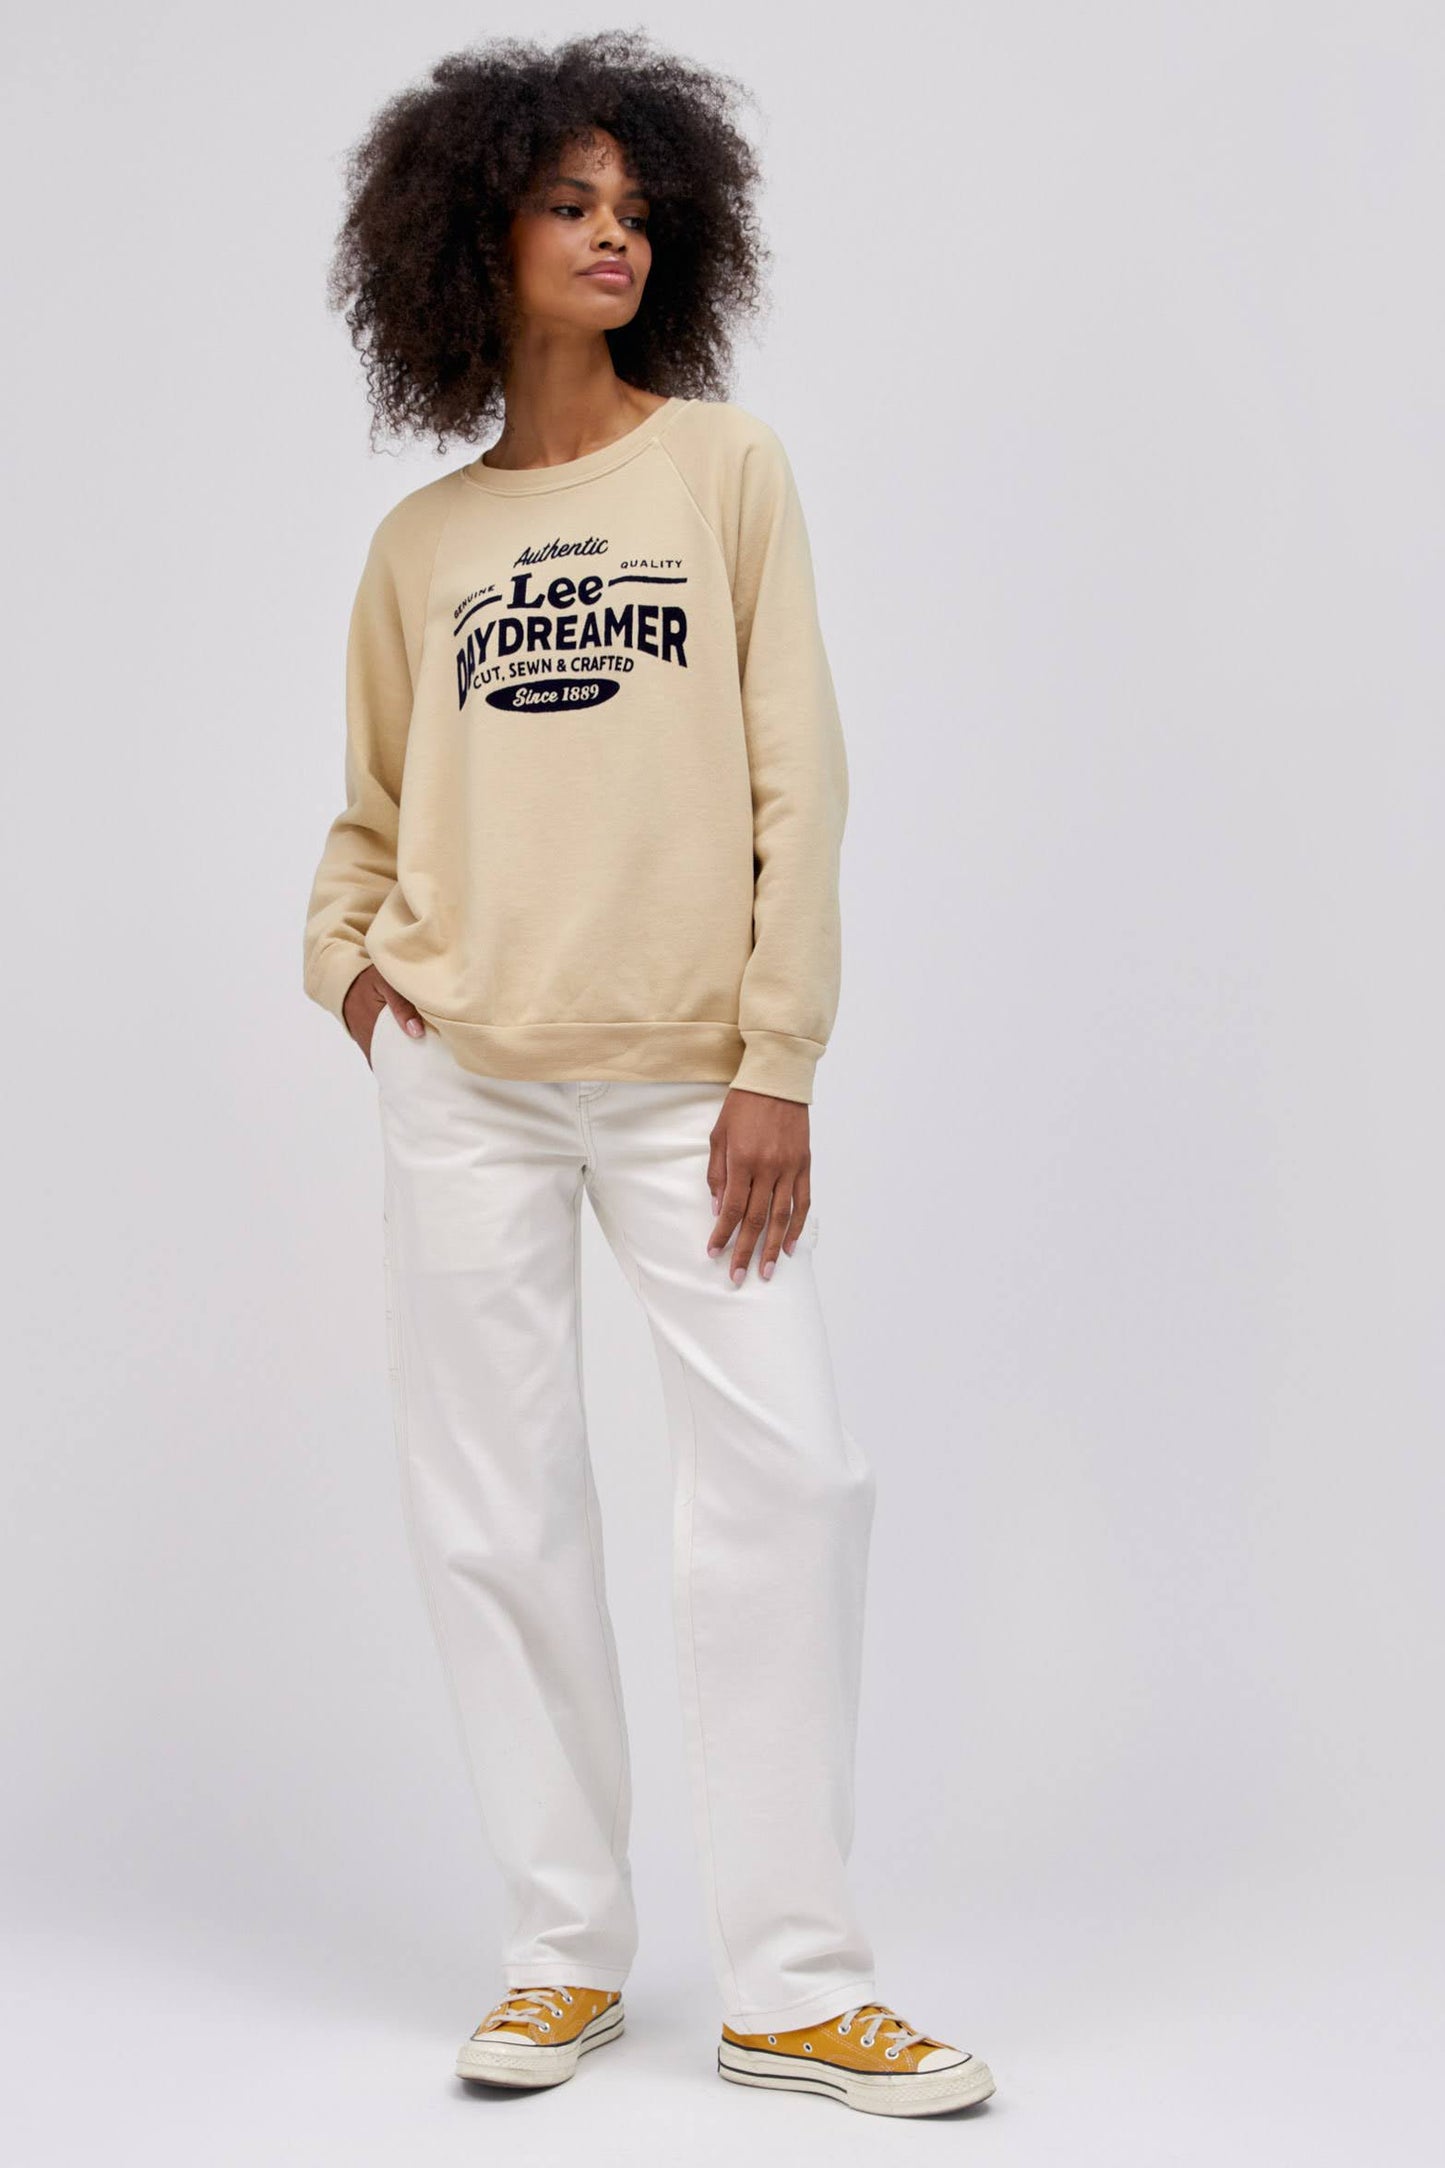 curly haired model wearing khaki colored sweatshirt and posing with hand in pocket of white workwear pants